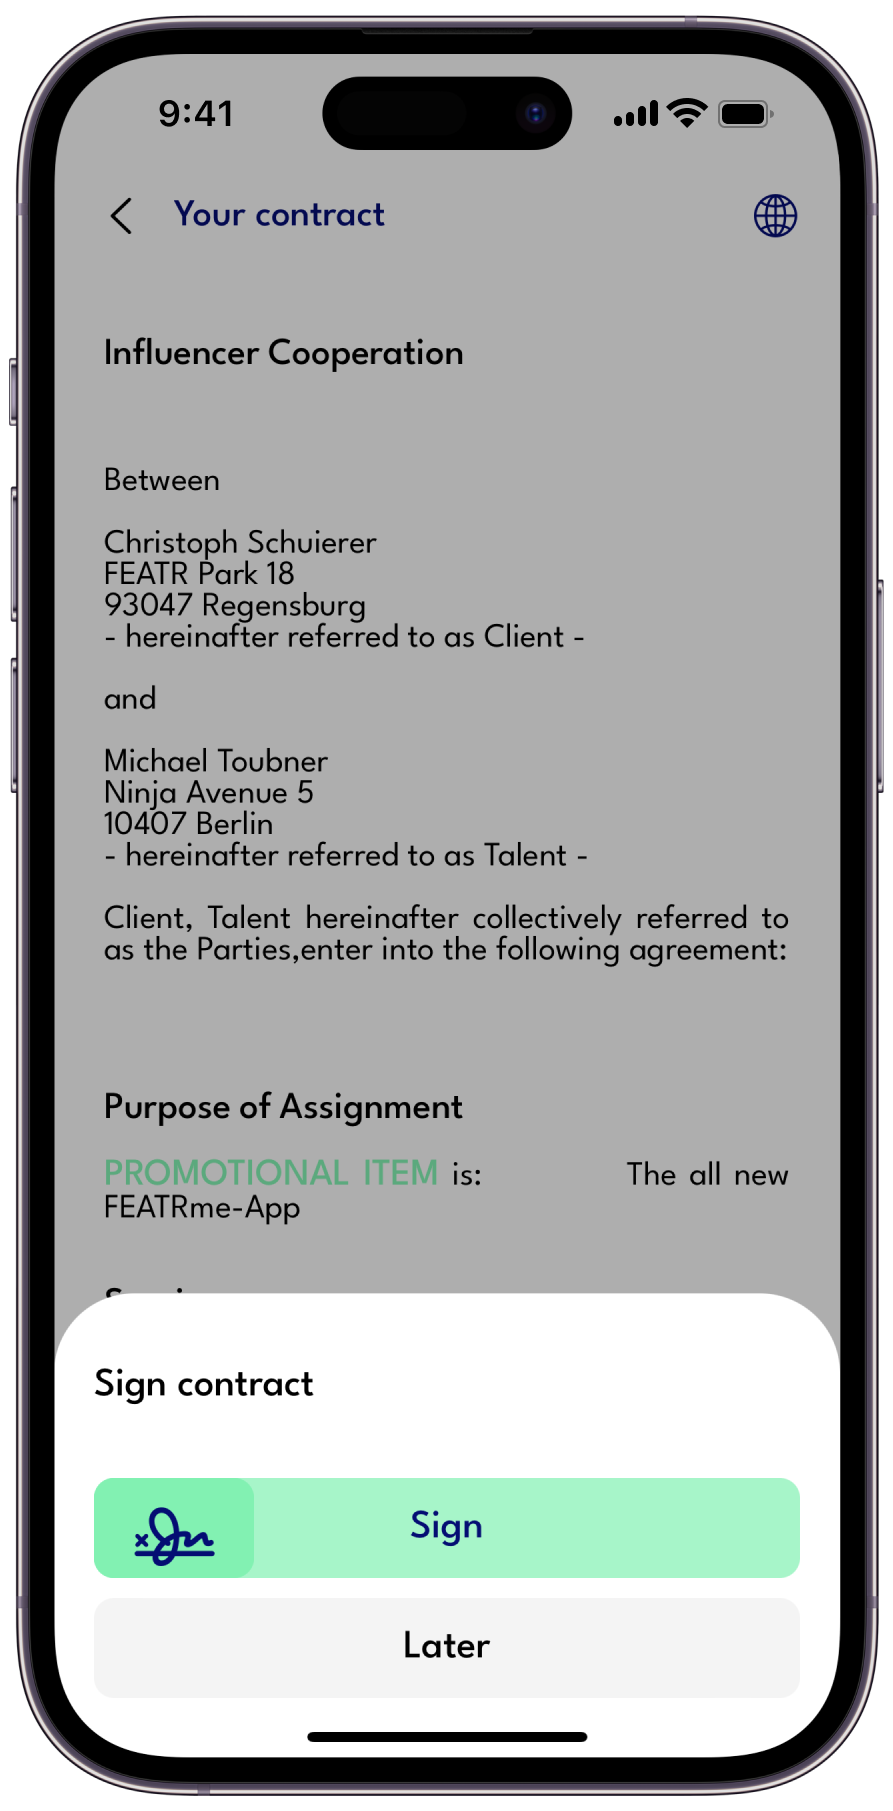 An iPhone with the FEATRme signing where the user can see and sign a contract